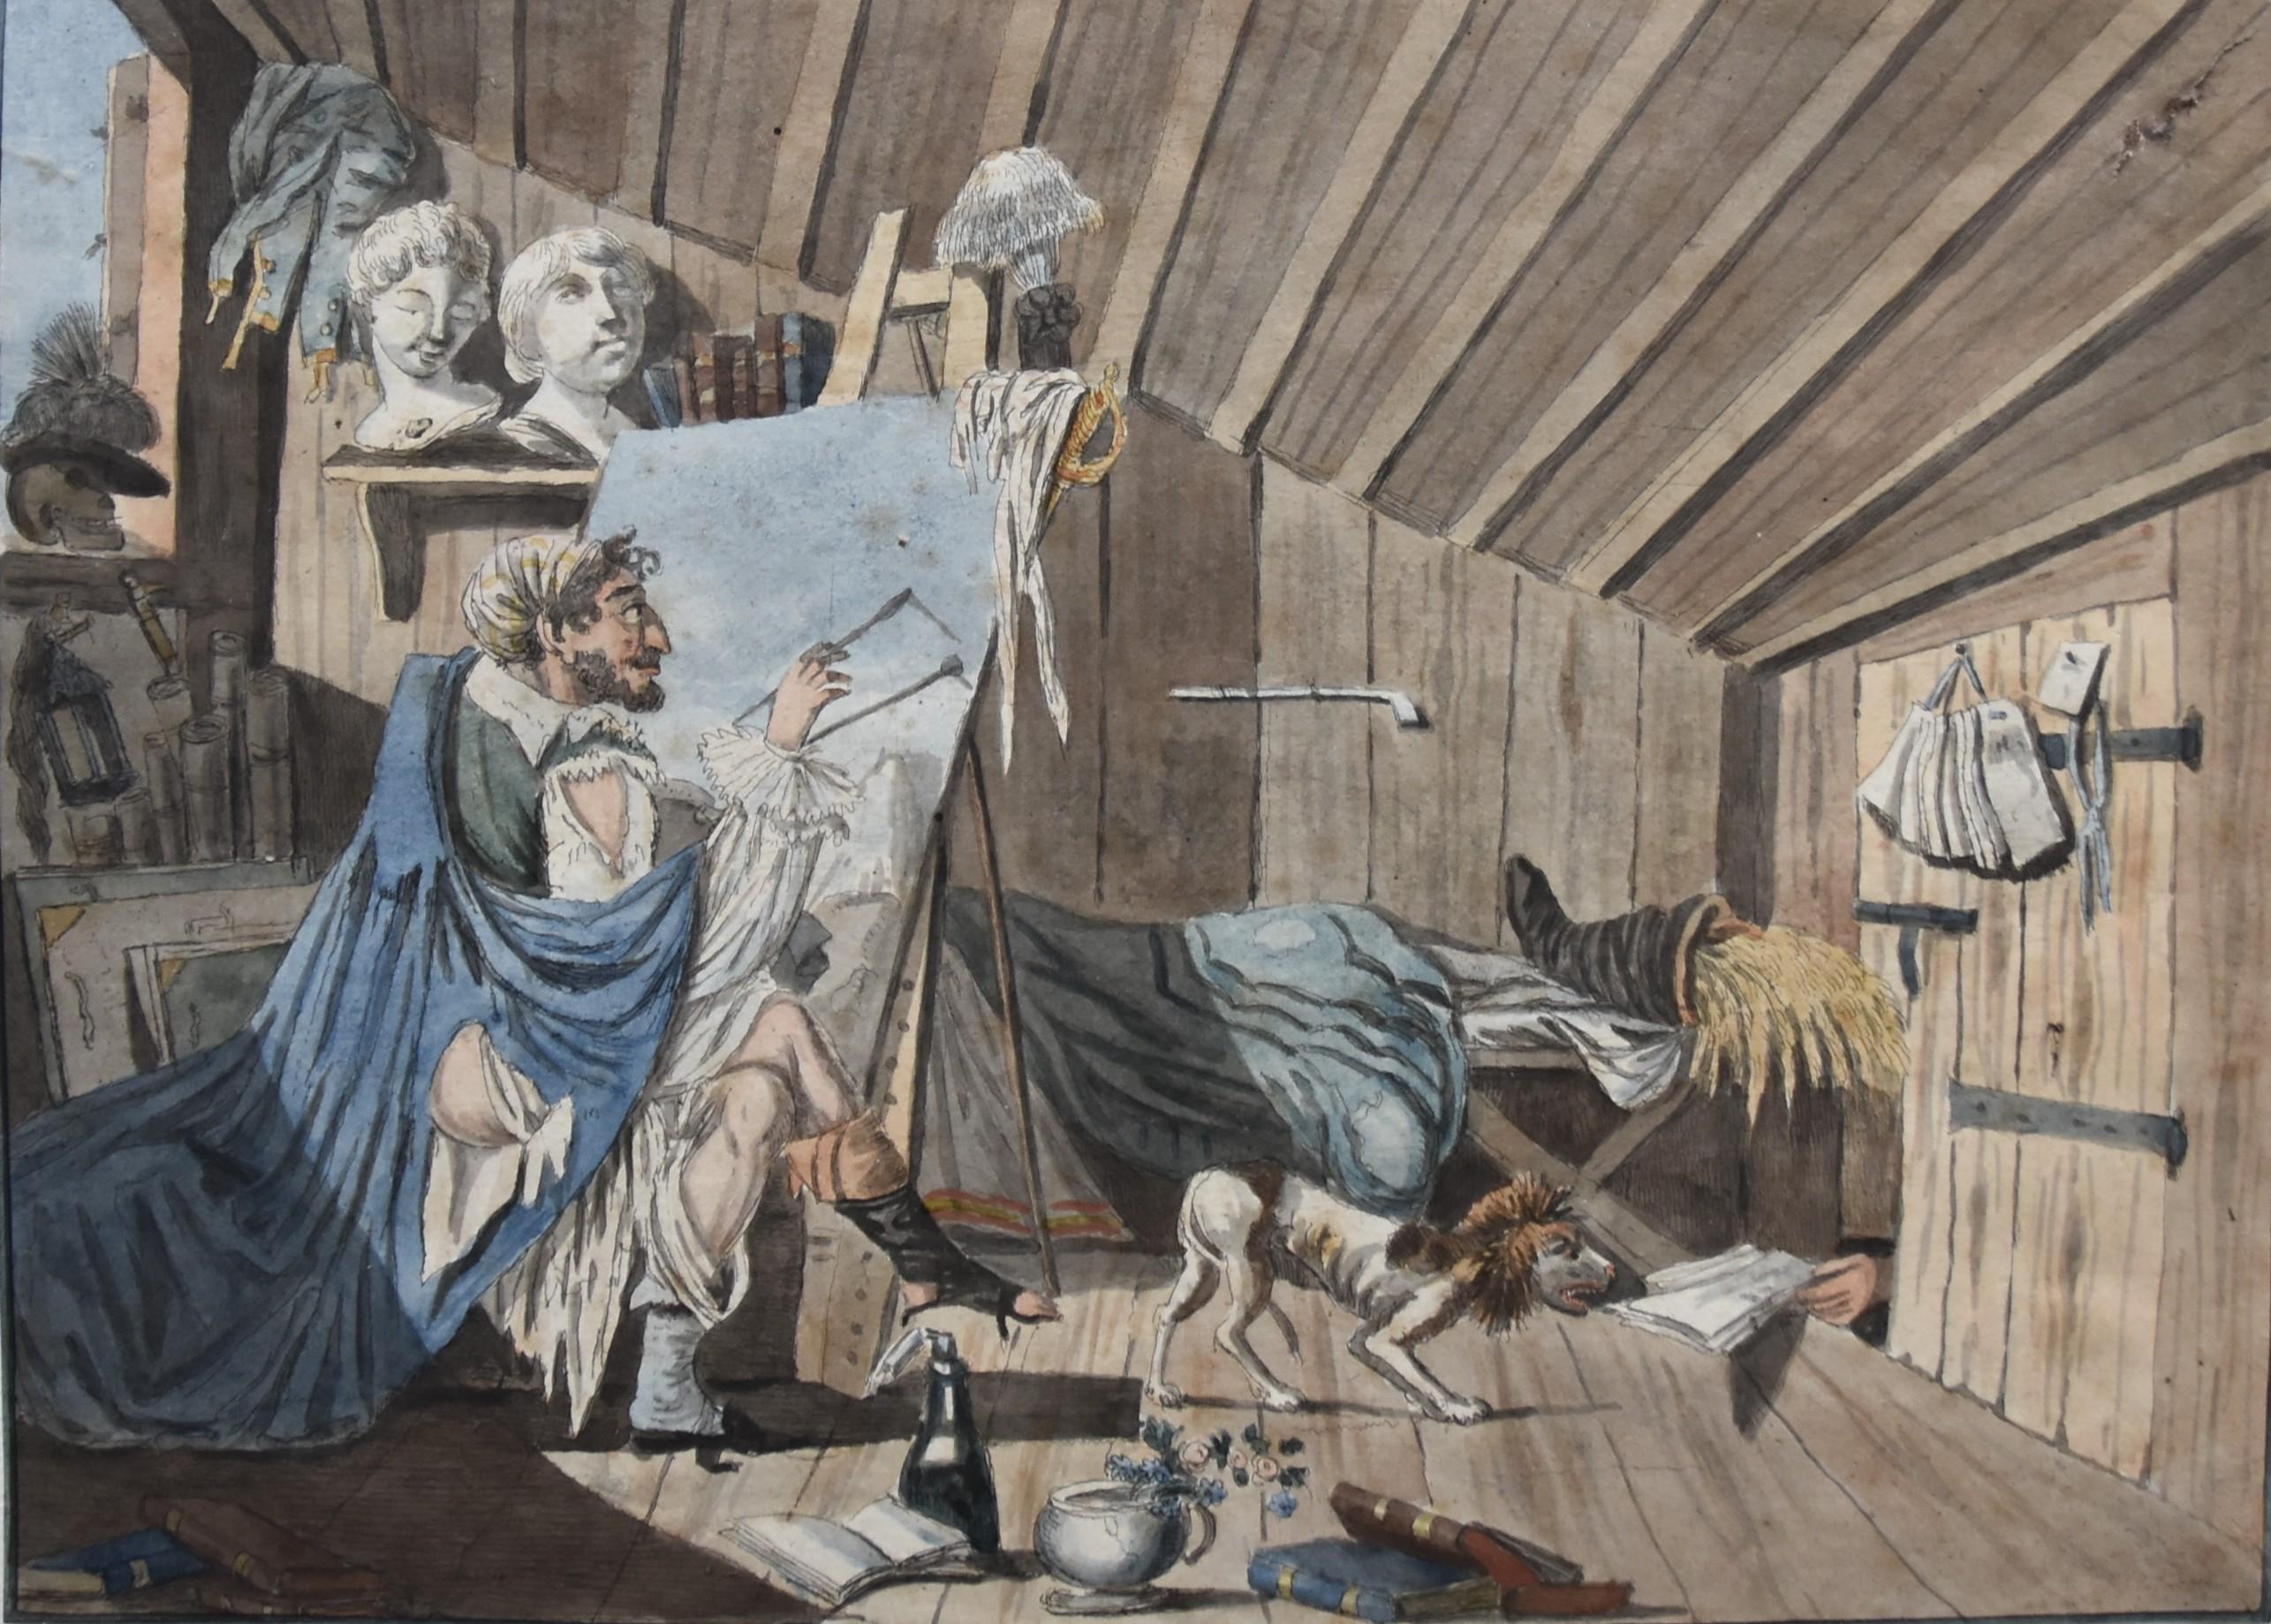 France 19th century, The Bohème artist in his workshop, watercolor